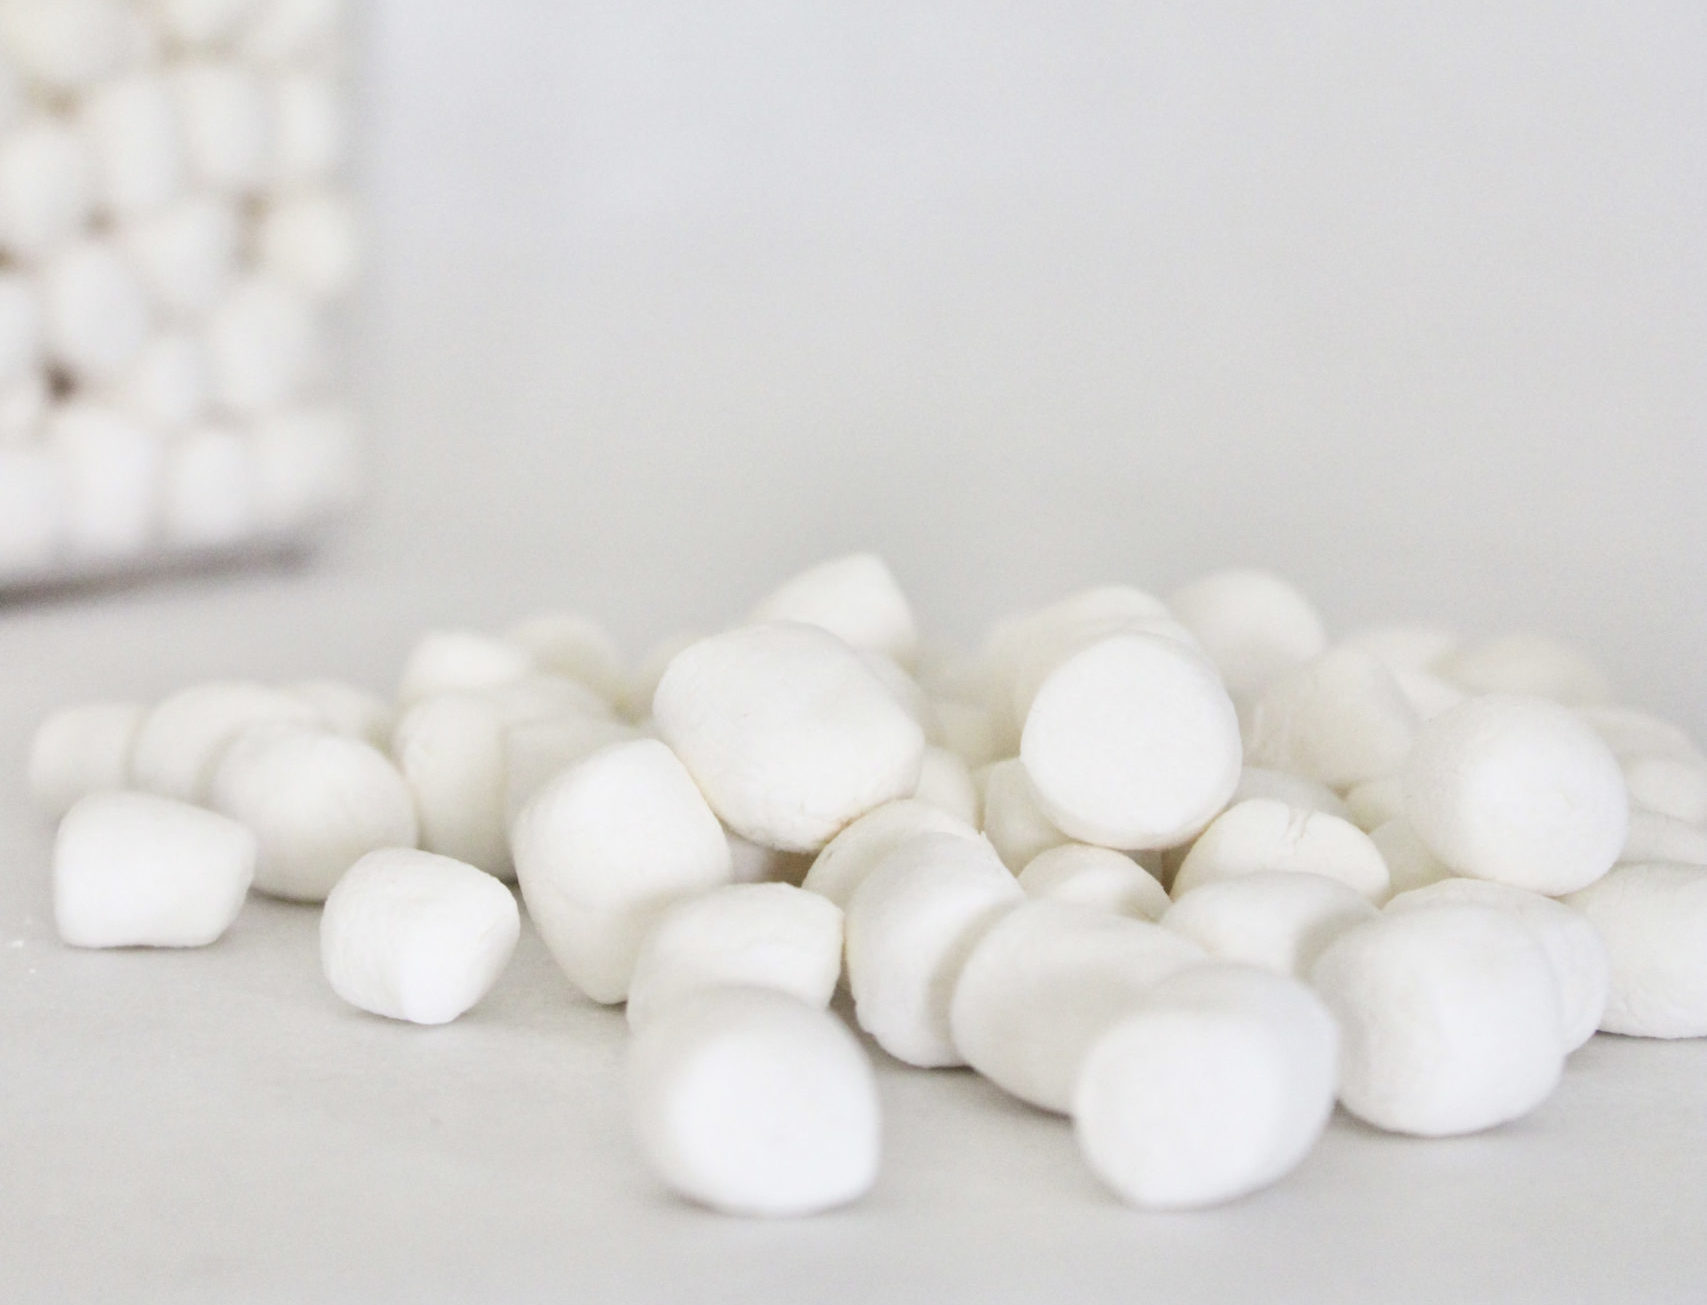 Dehydrating Marshmallows For Hot Cocoa - Food Storage Moms